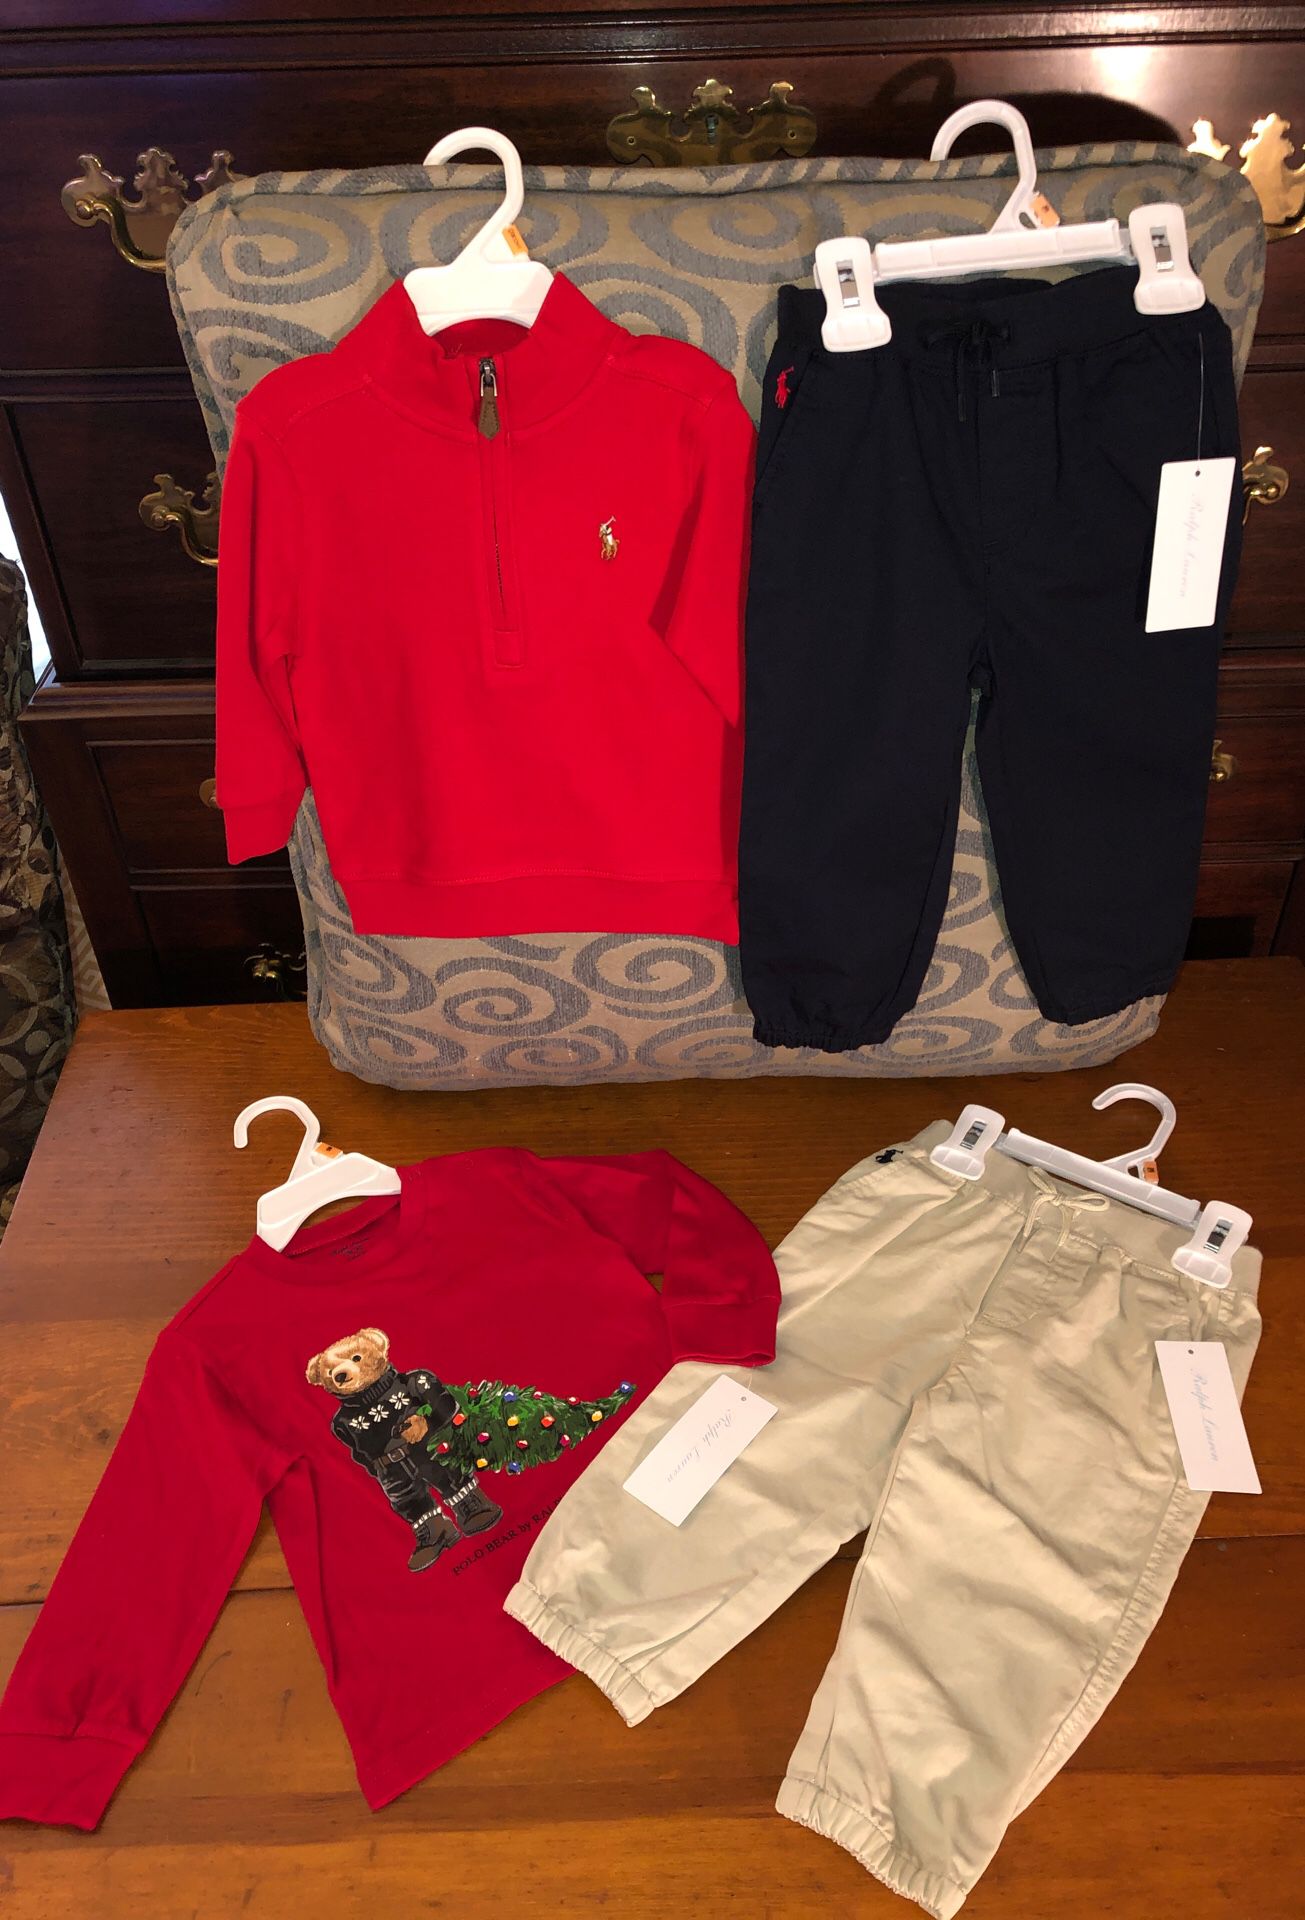 All Brand NEW! Ralph Lauren clothes for baby boy 🎈Size 12 months